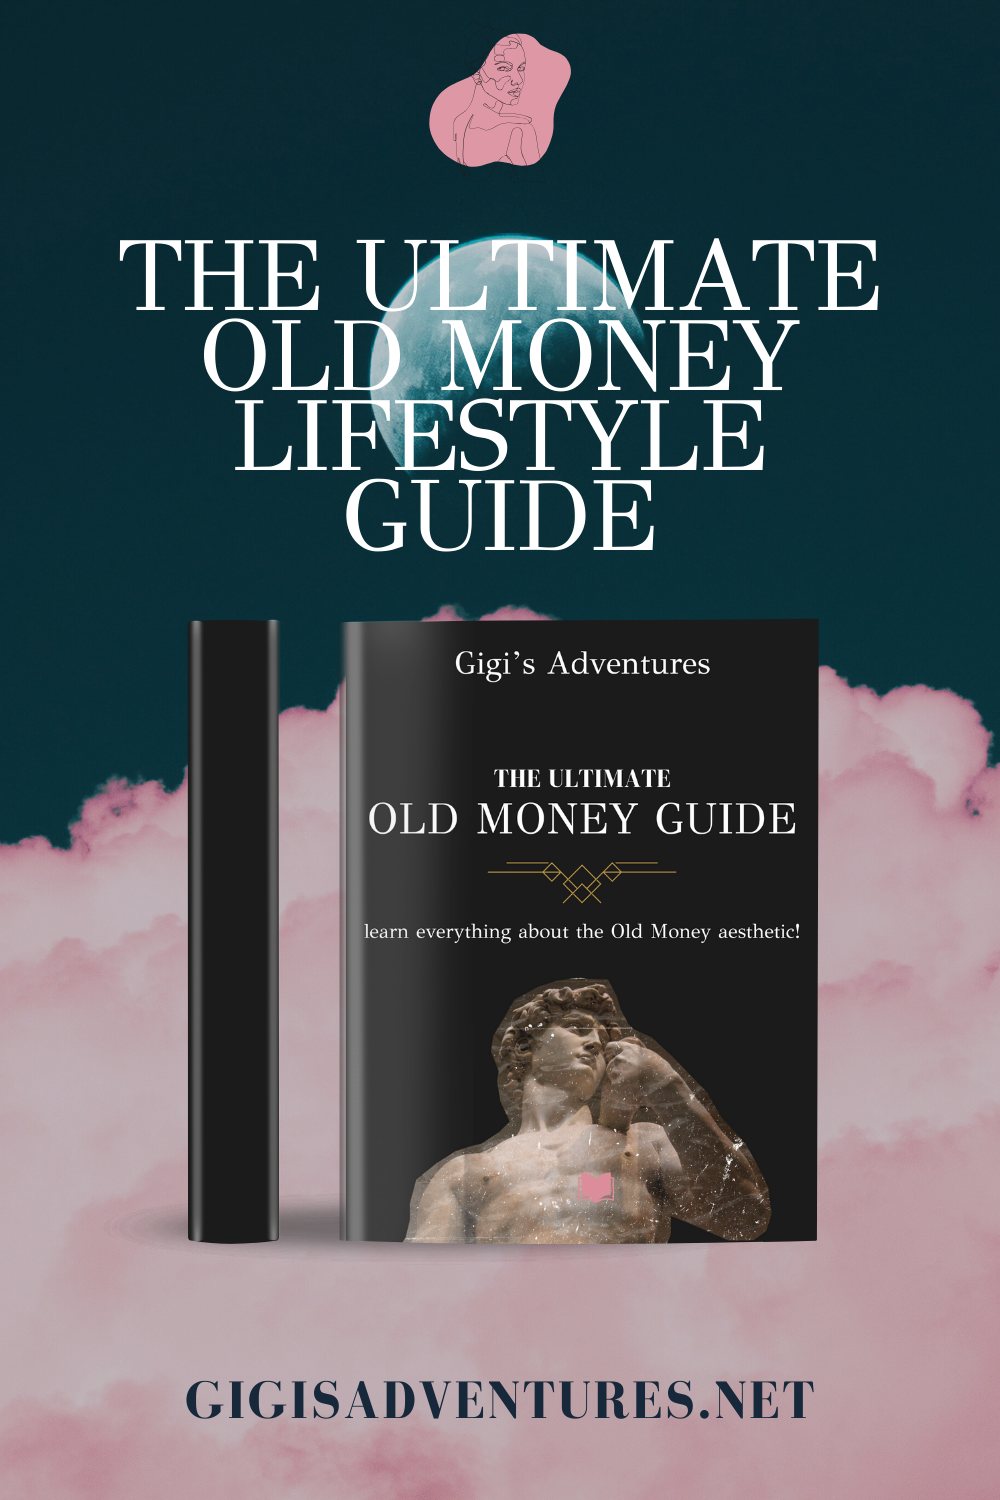 The Ultimate Old Money Lifestyle Guide To Completely Change Your Life